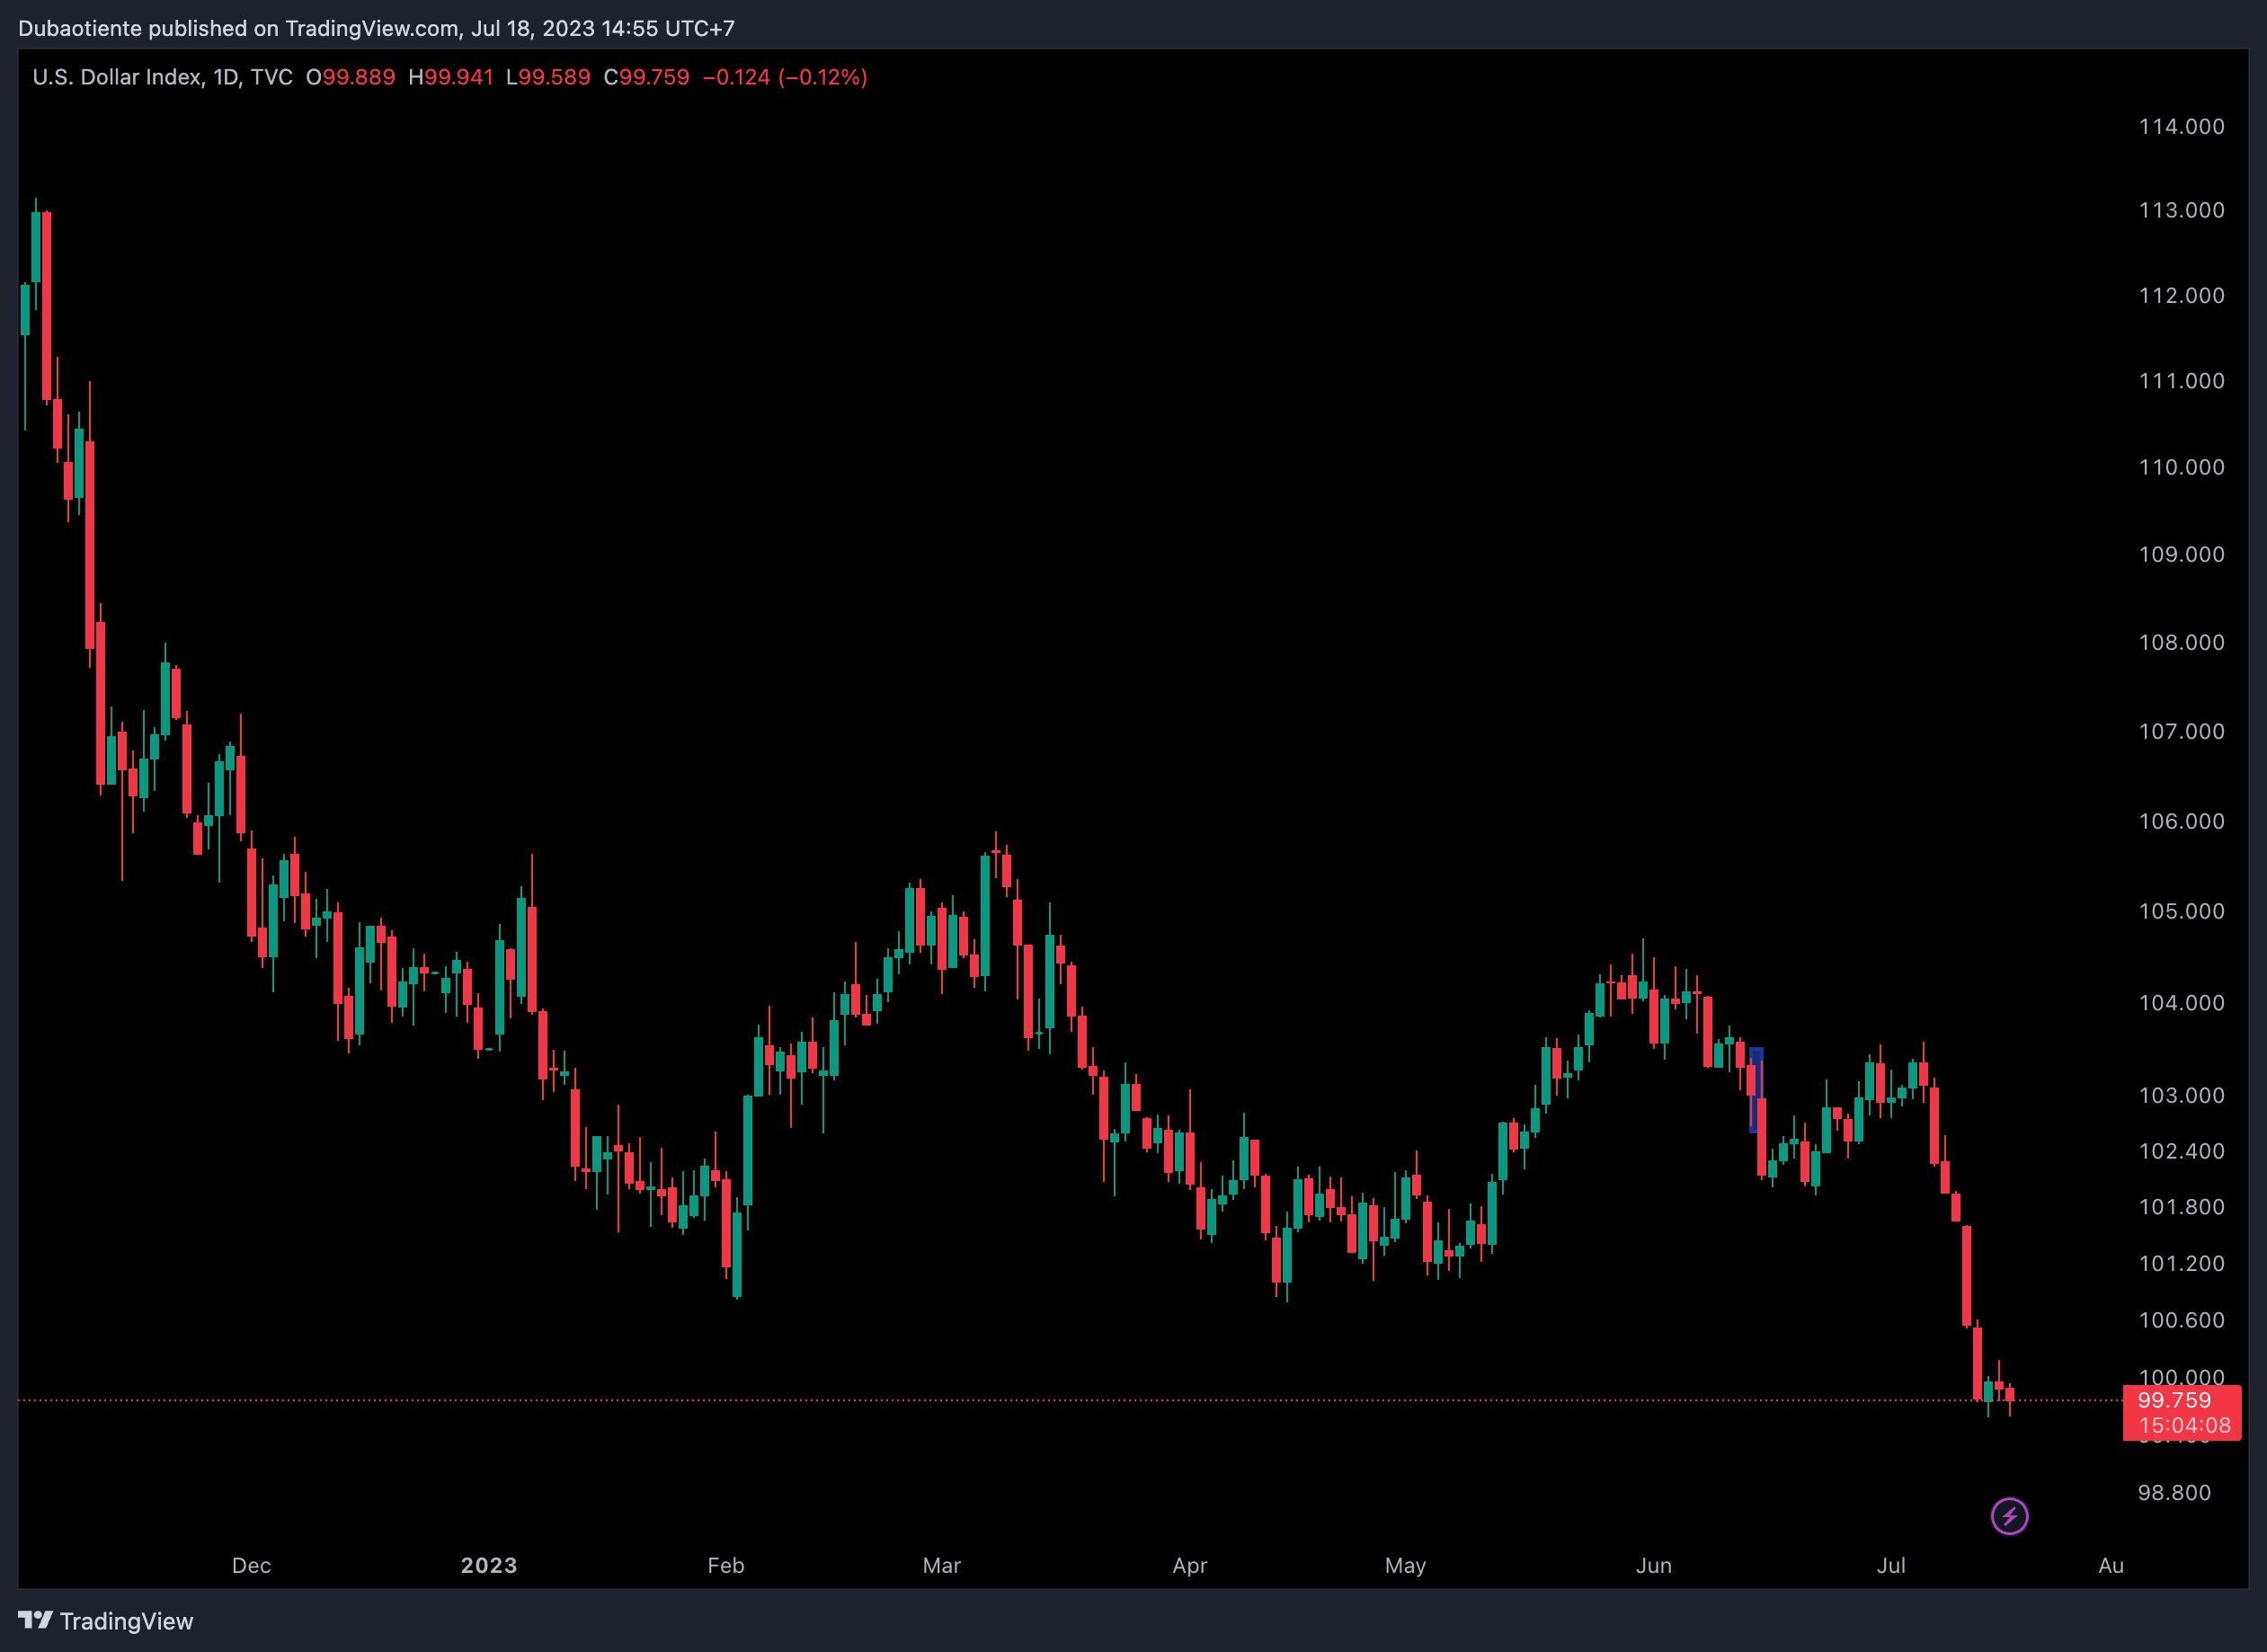 DXY (D1)